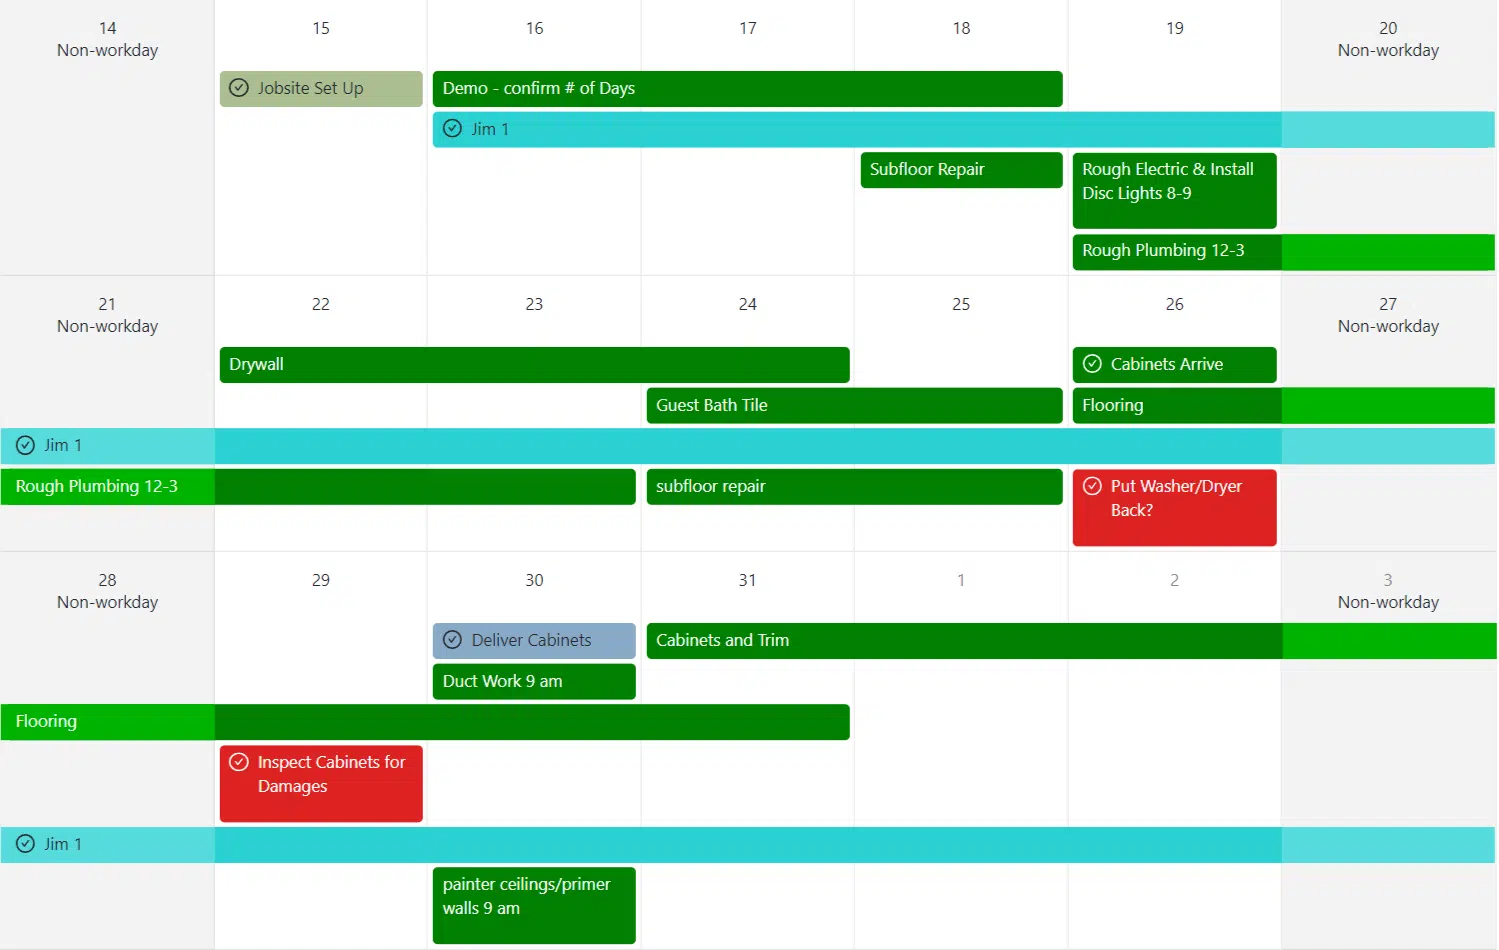 Project Schedule Example